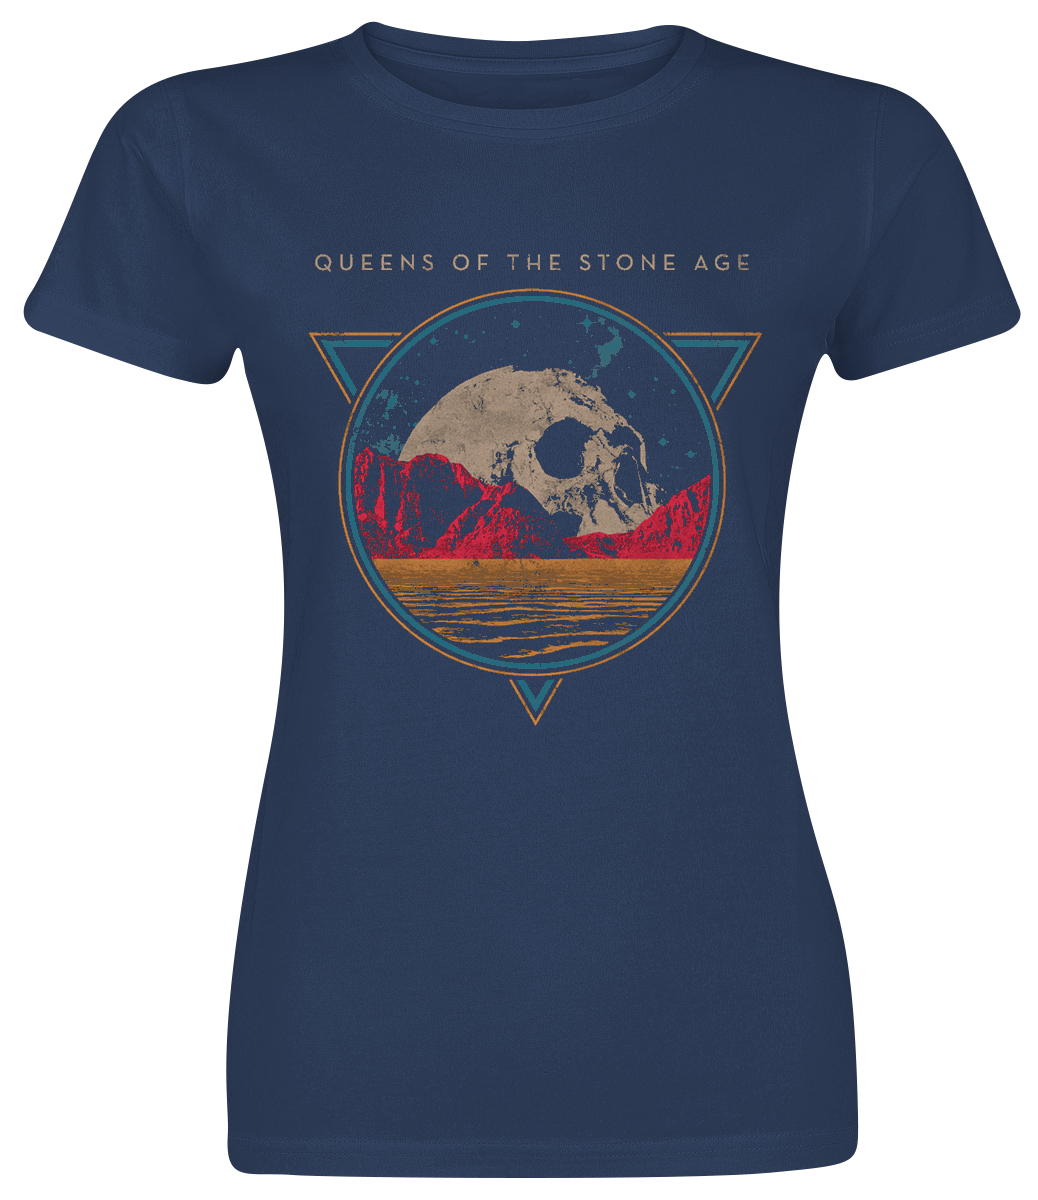 Queens Of The Stone Age - Skull Rock - Girls shirt - navy image